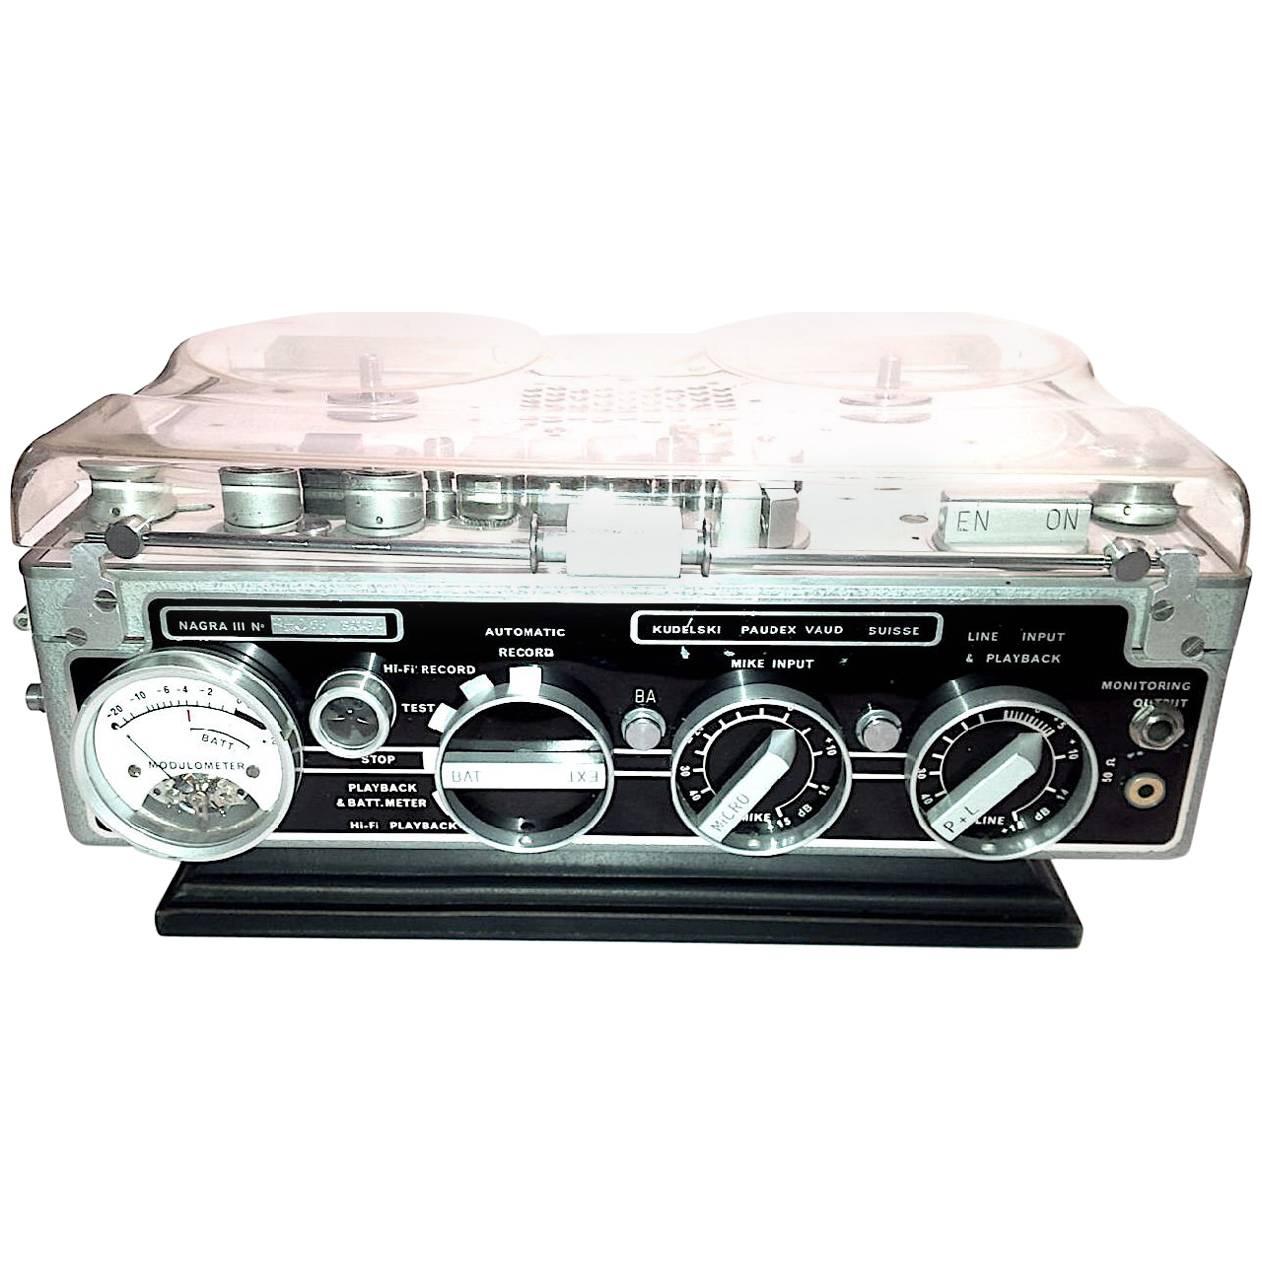 Motion Picture Audio Recorder. "Nagra III", Circa 1966 Vintage Sculpture ON SALE For Sale